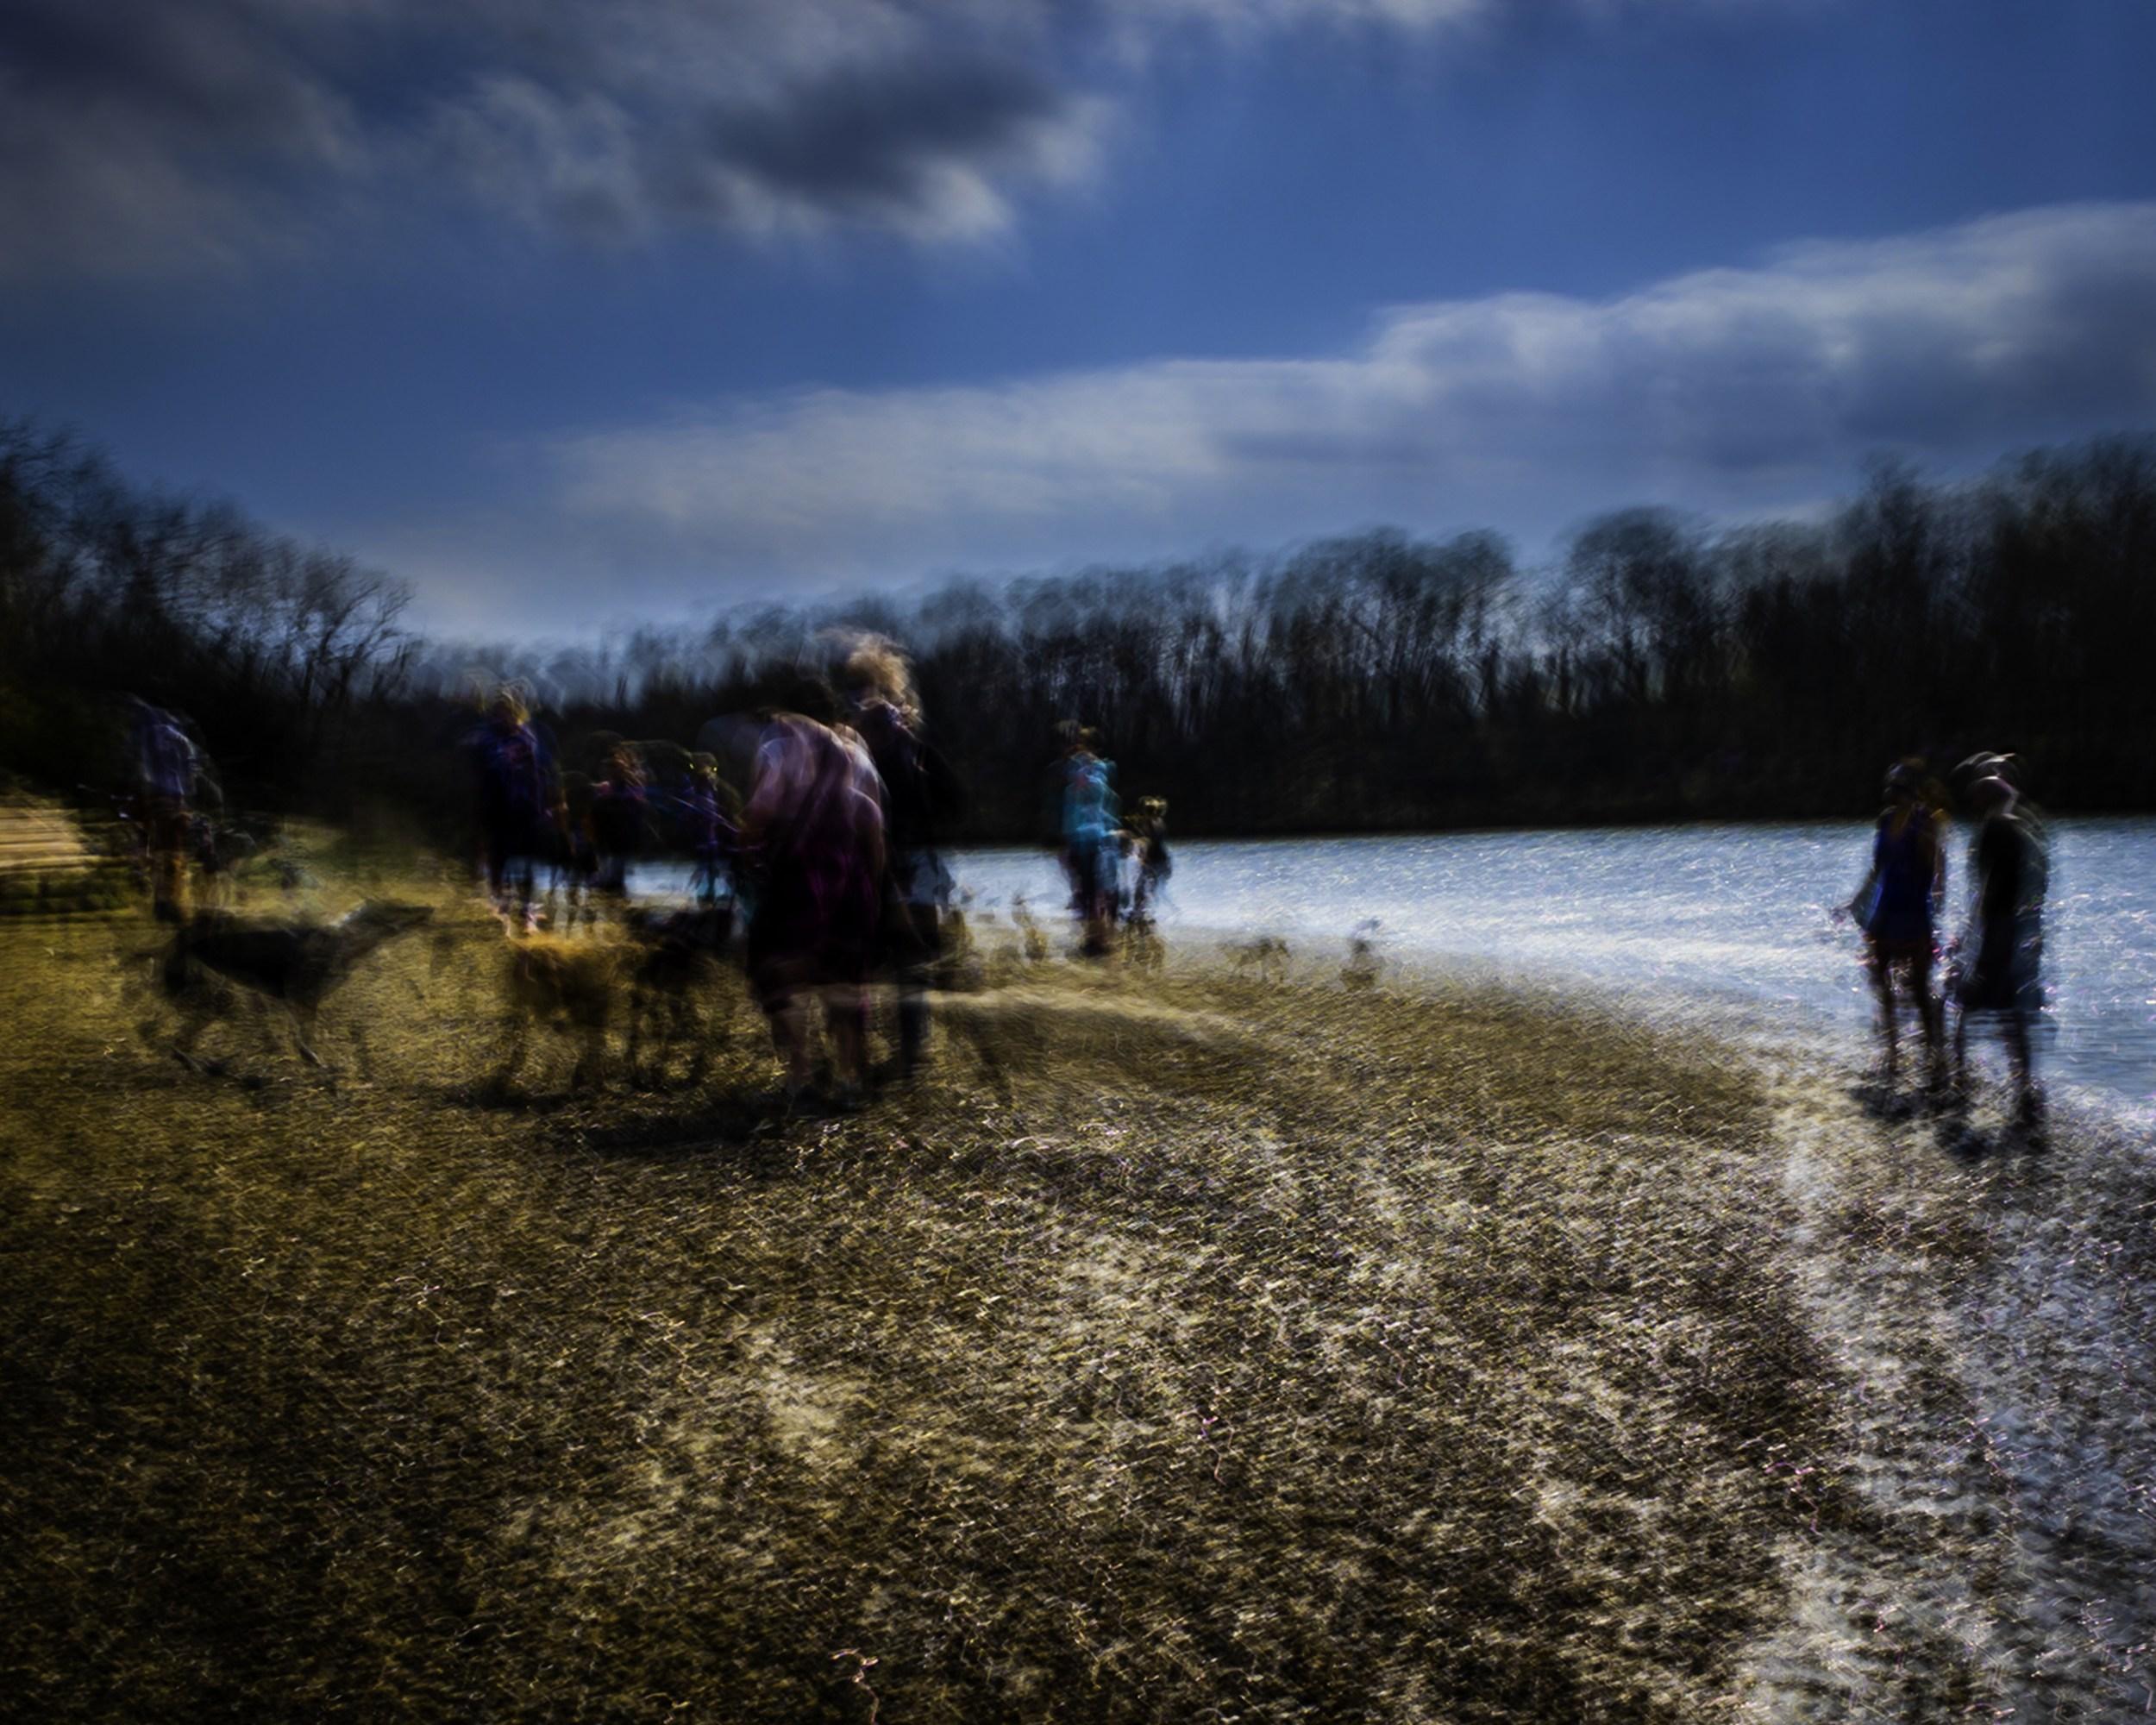 Jeffrey Tamblyn Abstract Photograph - Dog Park Beach (dogs, dog park, outdoor scene, waterfront, twilight, placid)